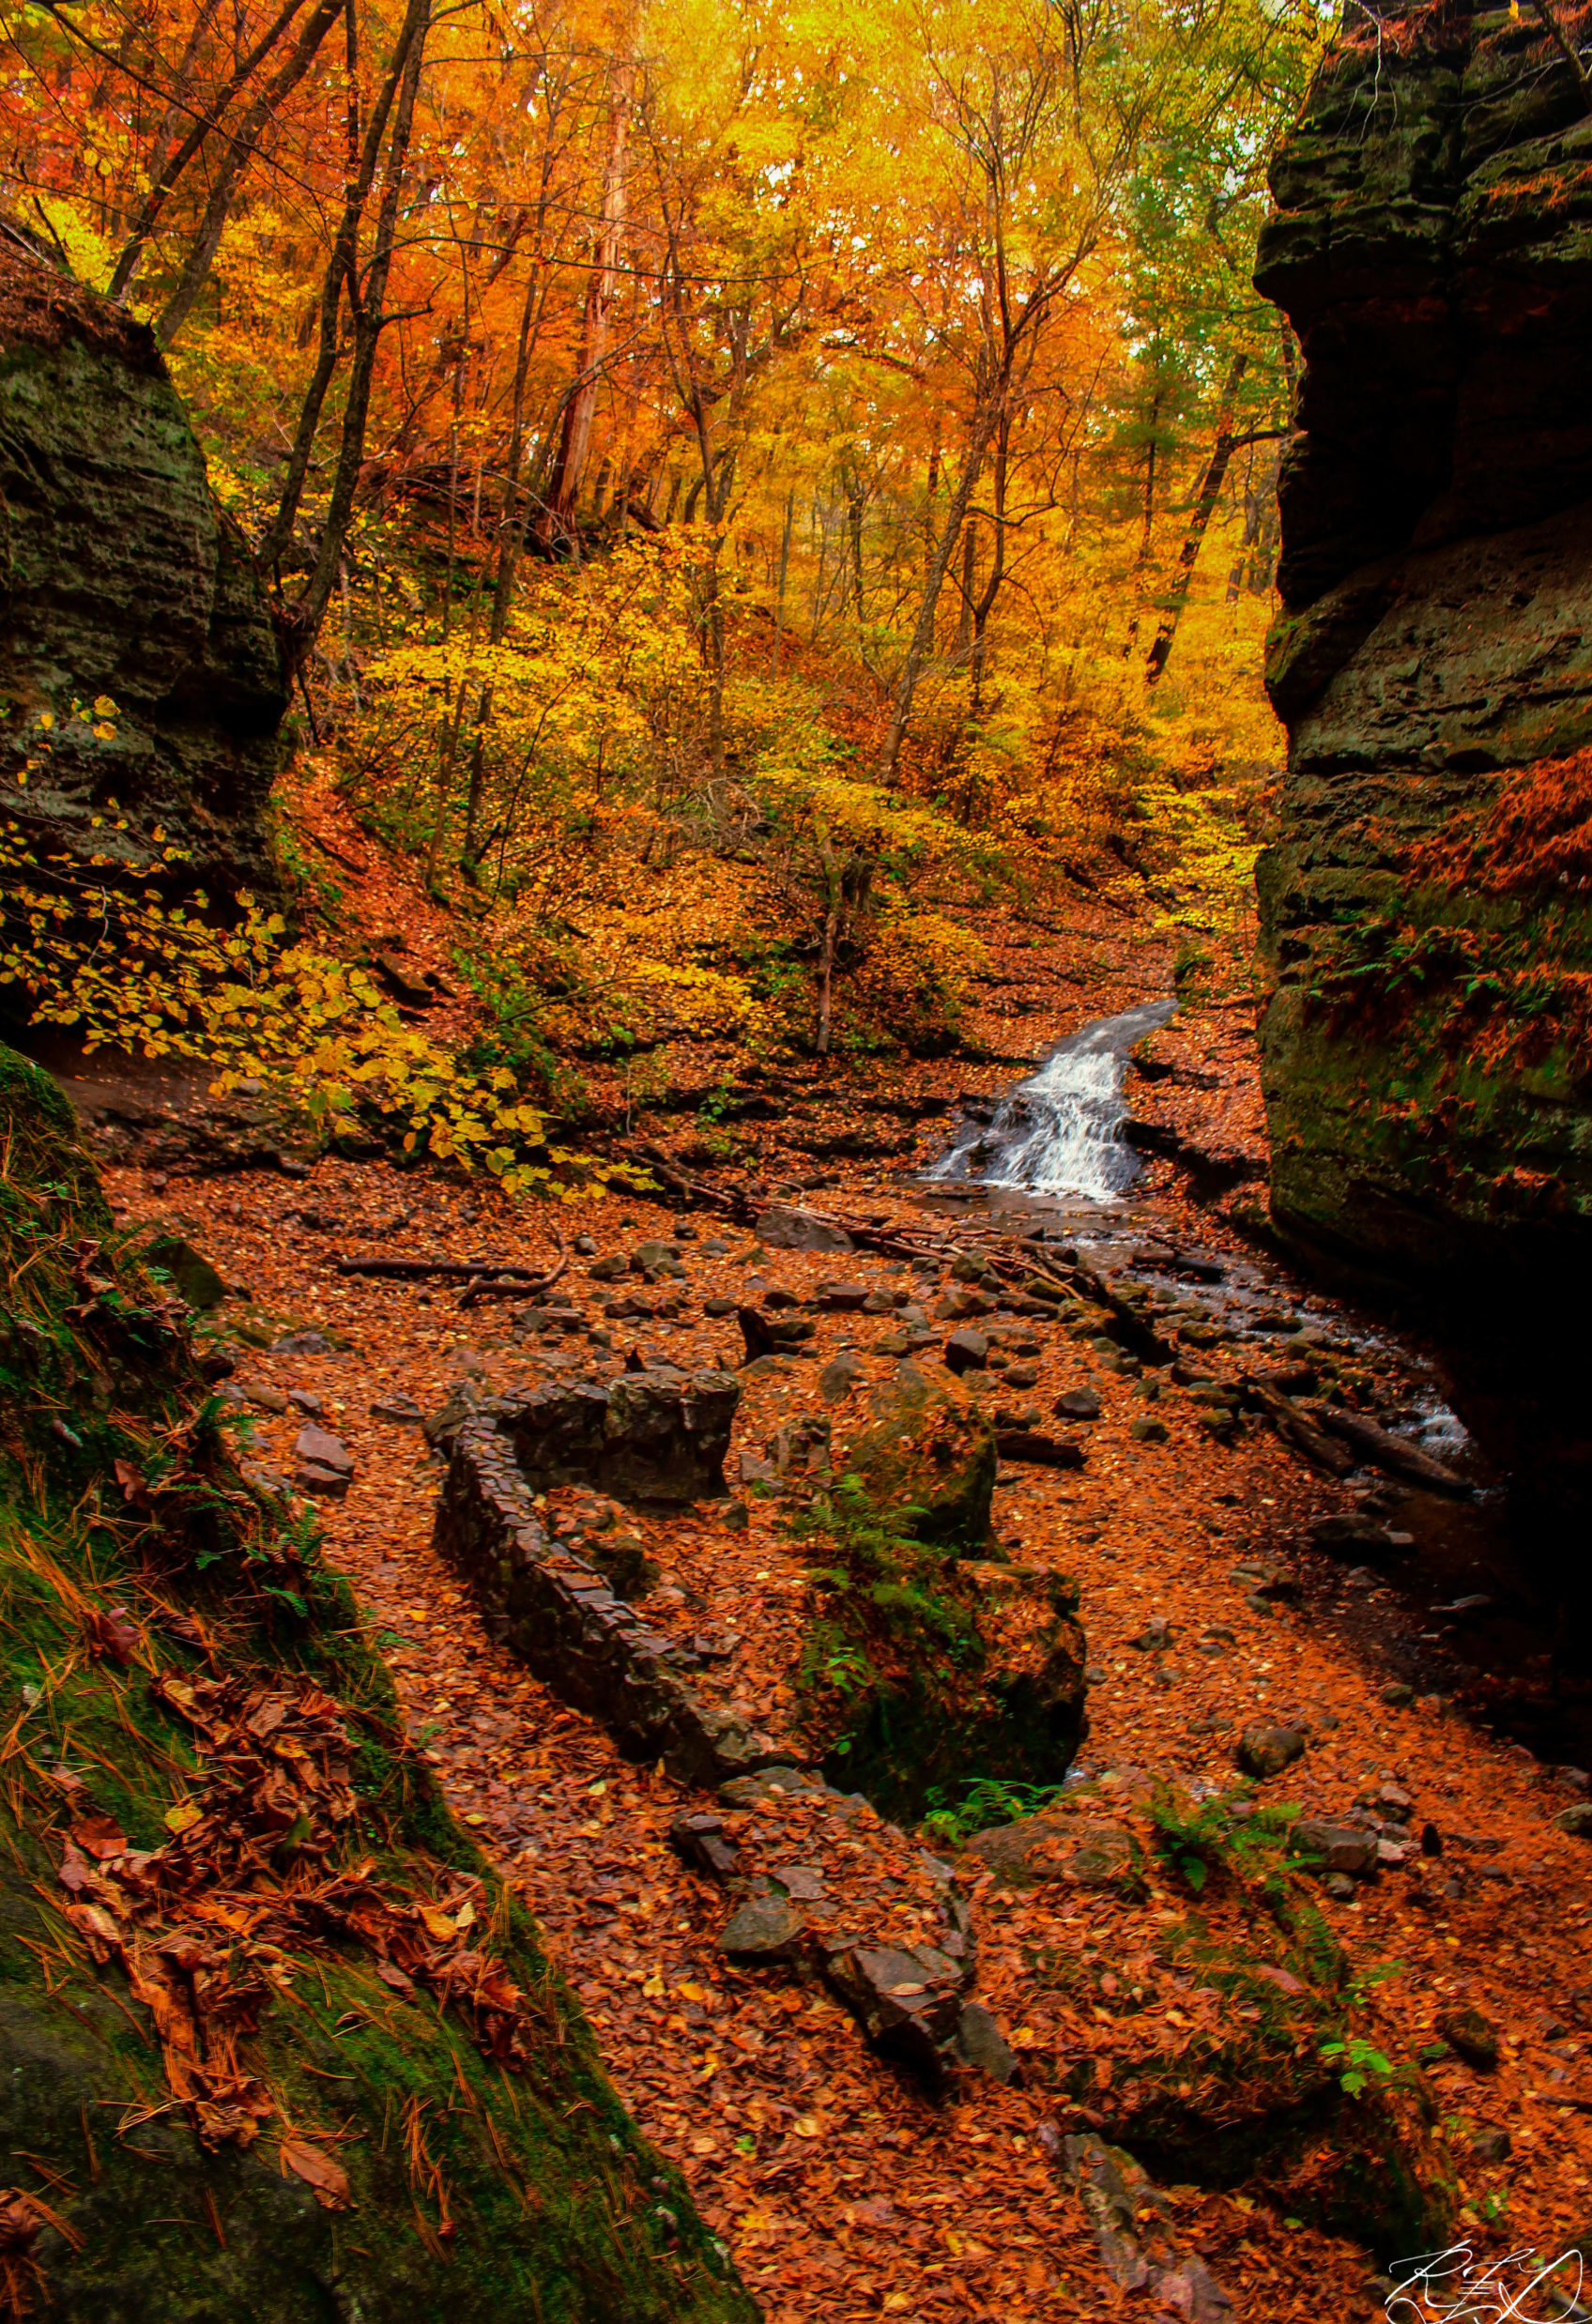 Waterfall surrounded by autumn colored leaves and trees